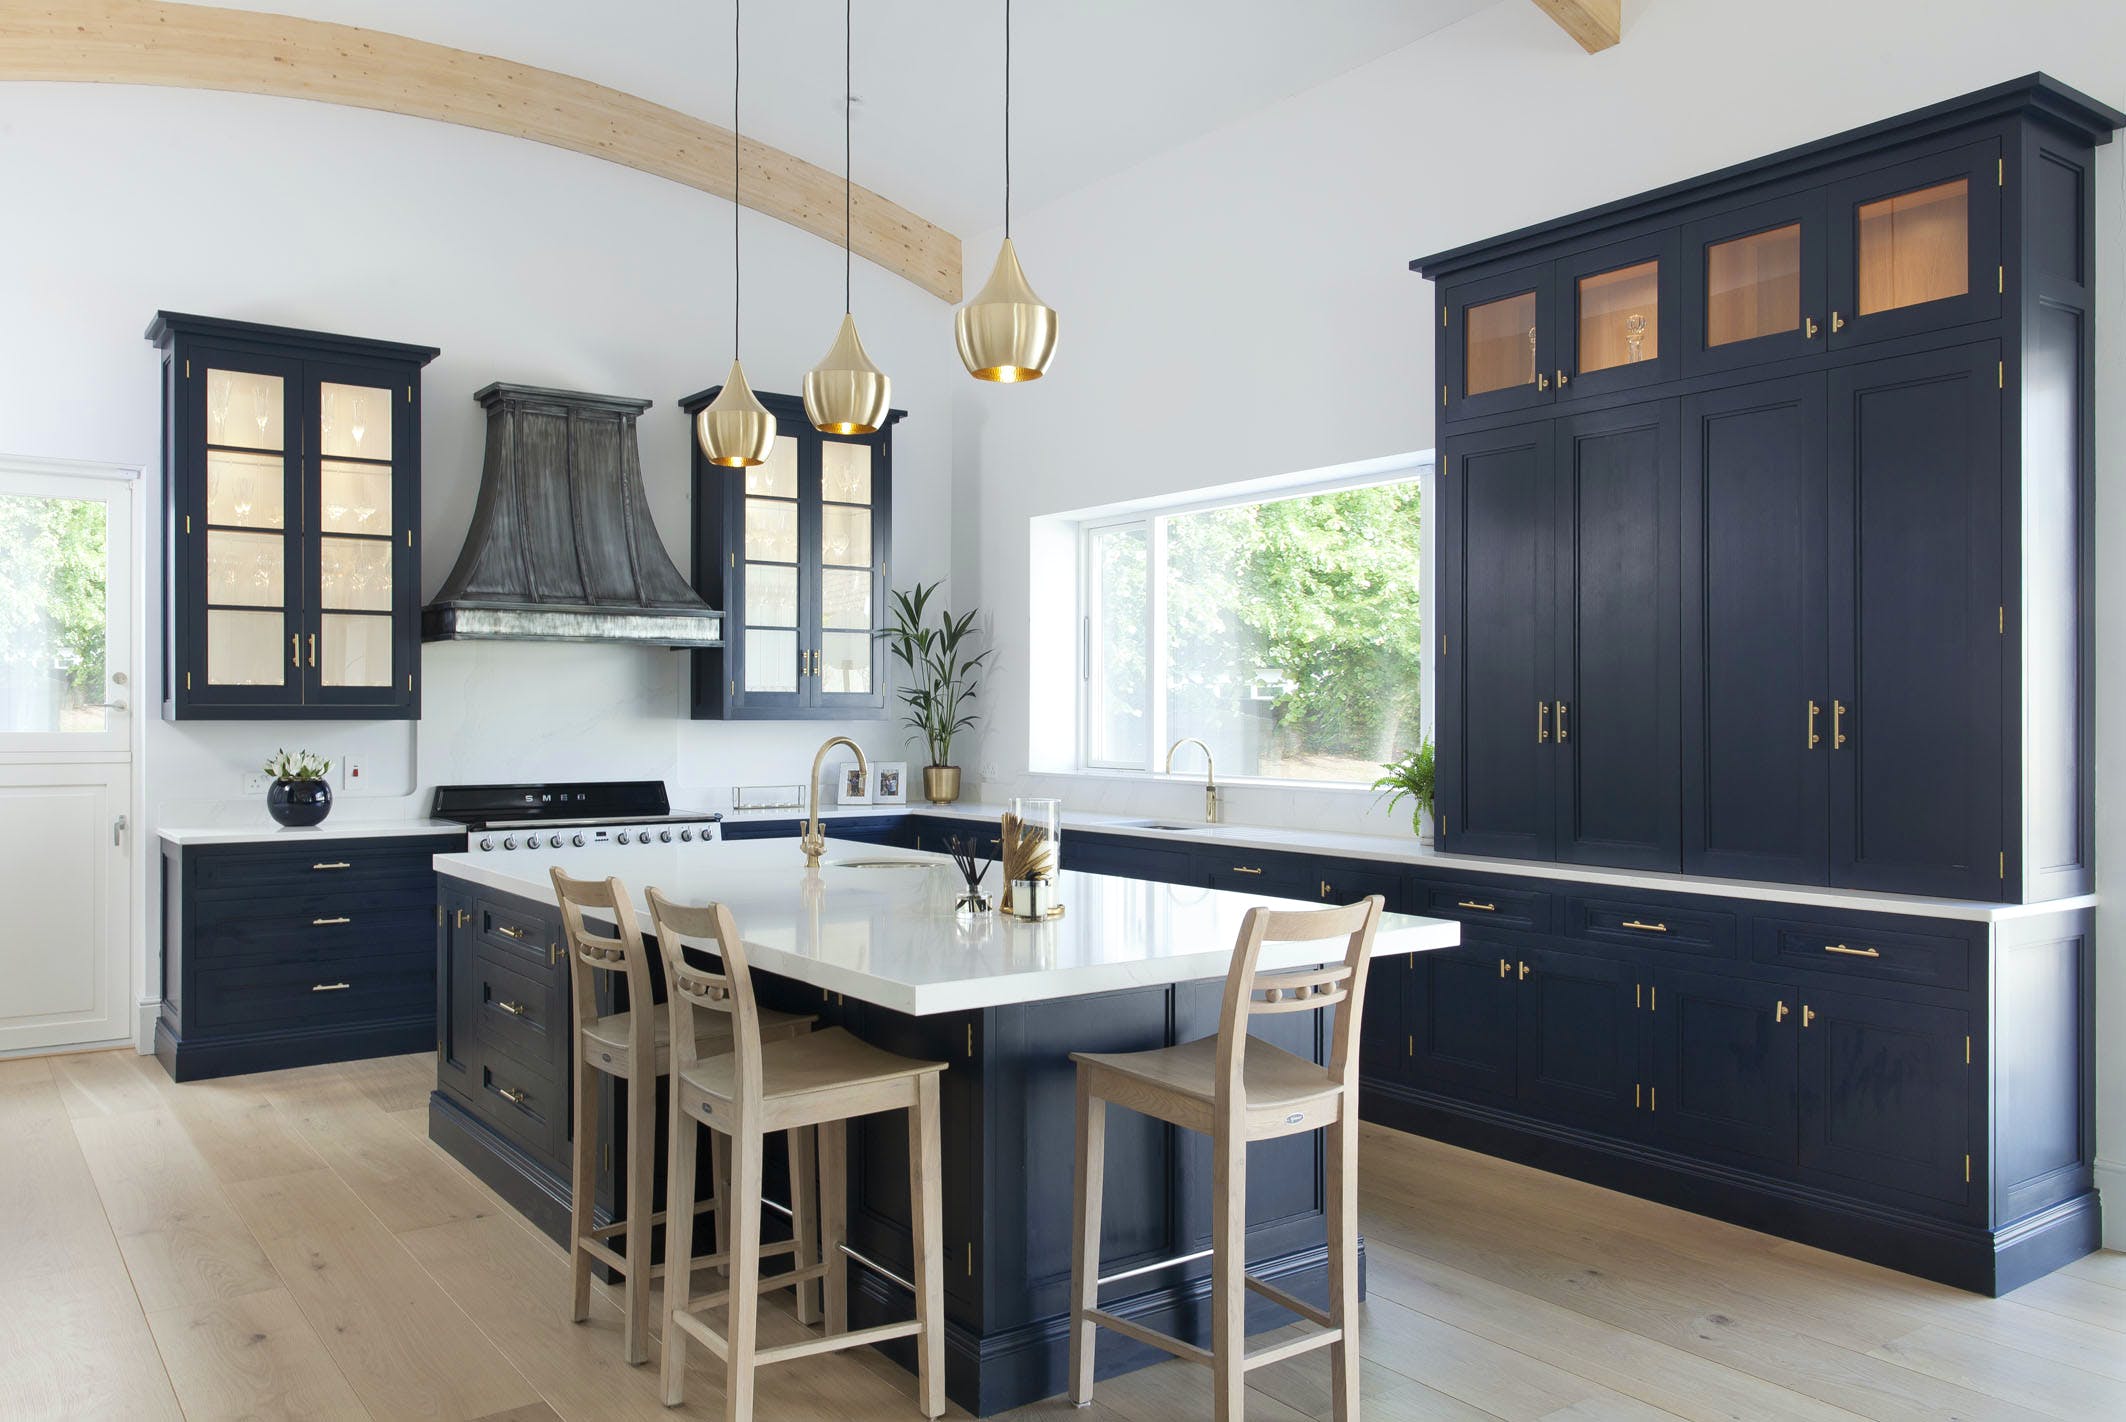 Image of Shalford Interiors Silestone Calacatta Gold 1 in The Top 7 Kitchen Makeover Trends - Cosentino